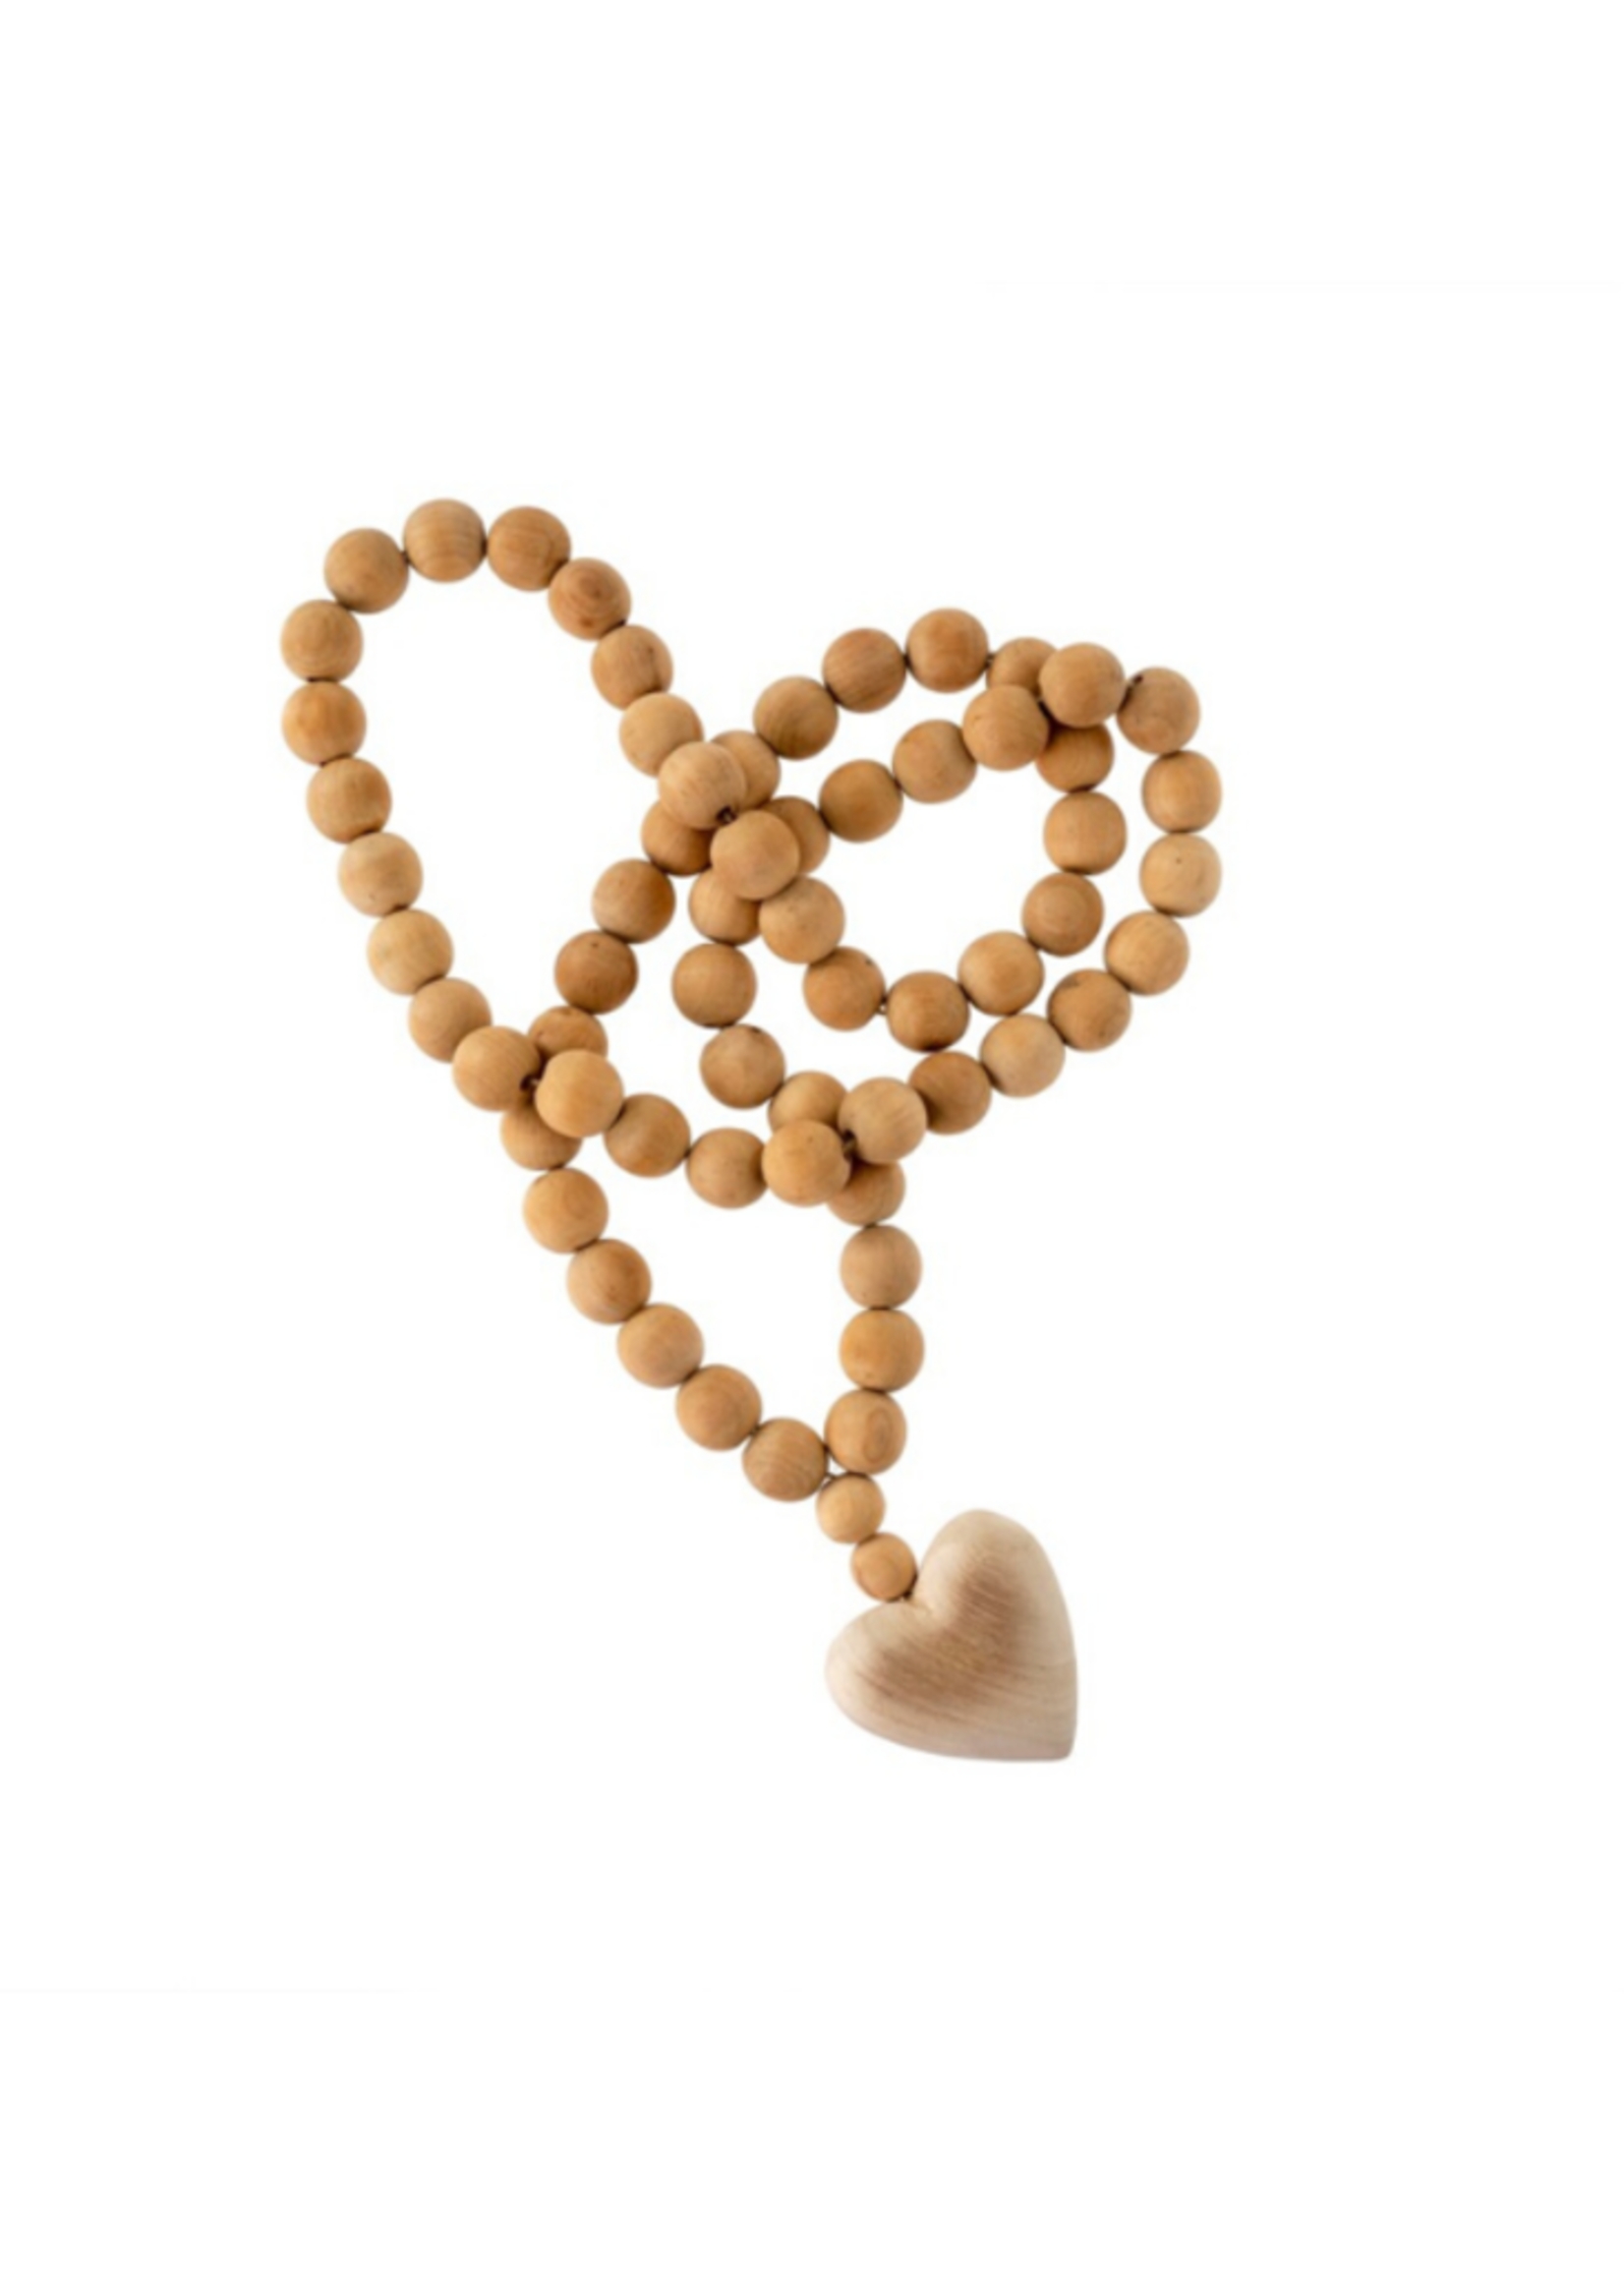 Indaba Trading Co XL Heart Beads | Natural